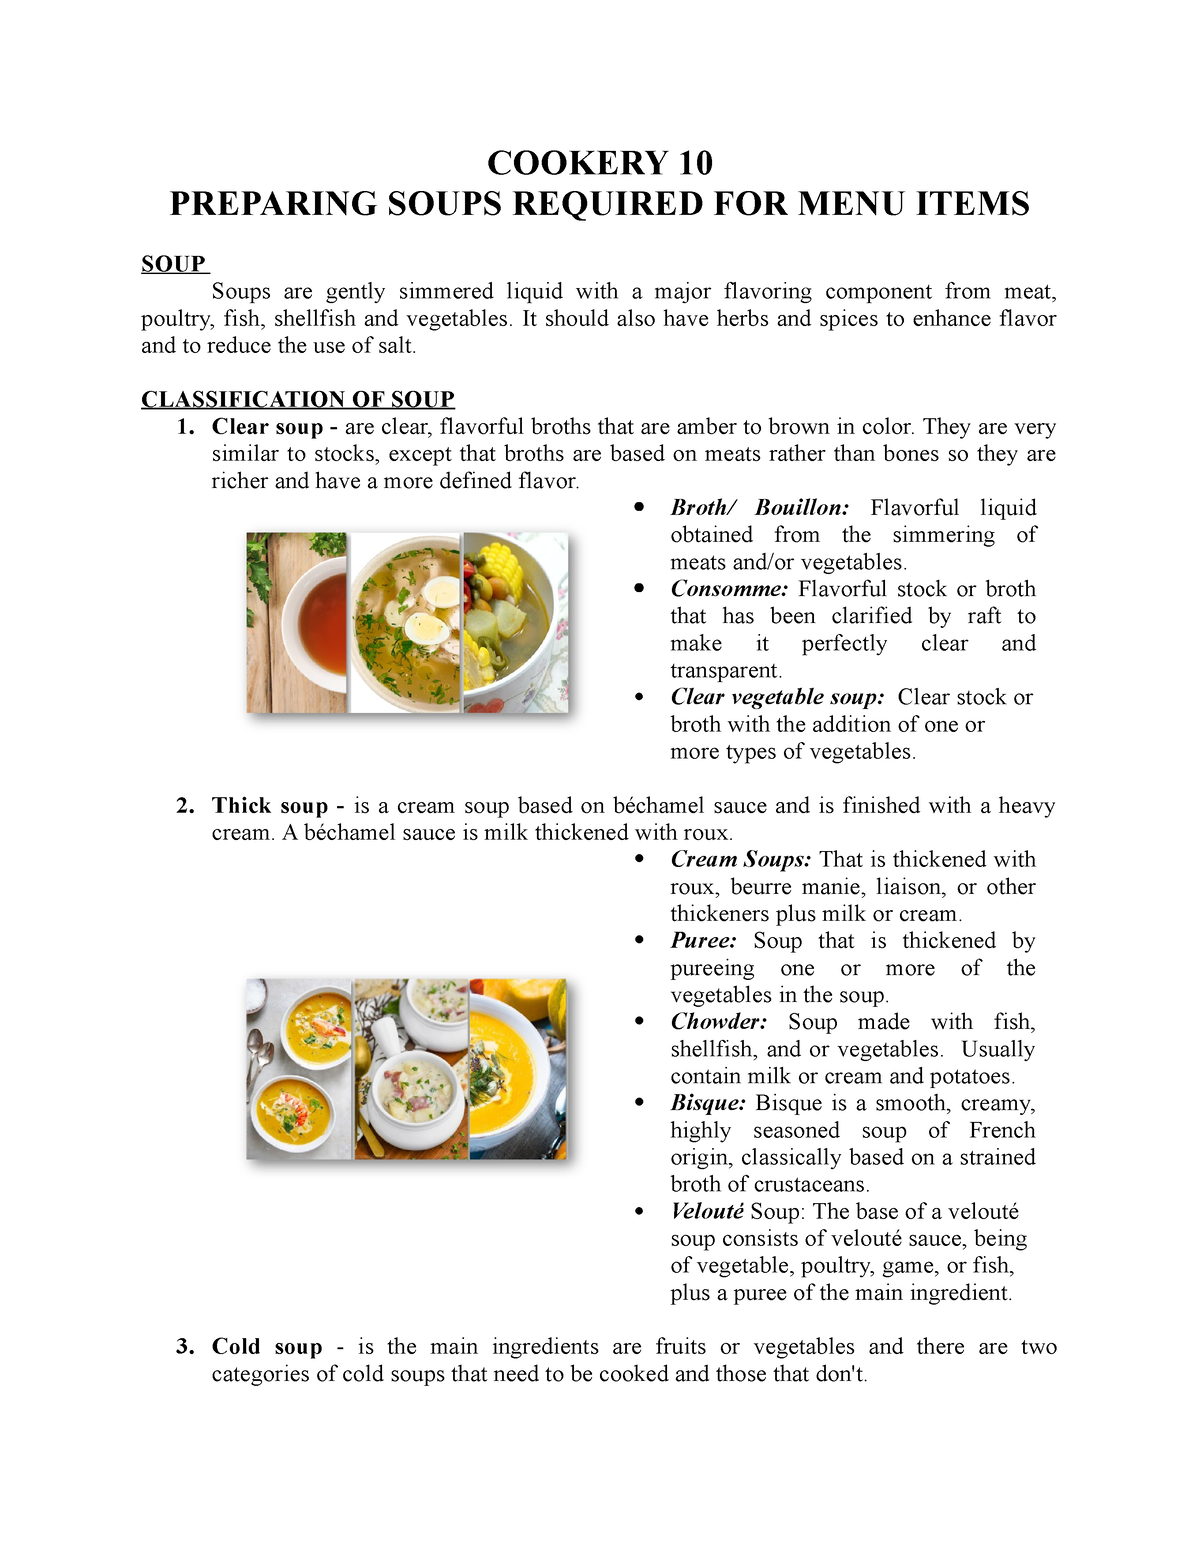 Cookery 10 Preparing Soups Required For Menu Items Cookery 10 Preparing Soups Required For 3060